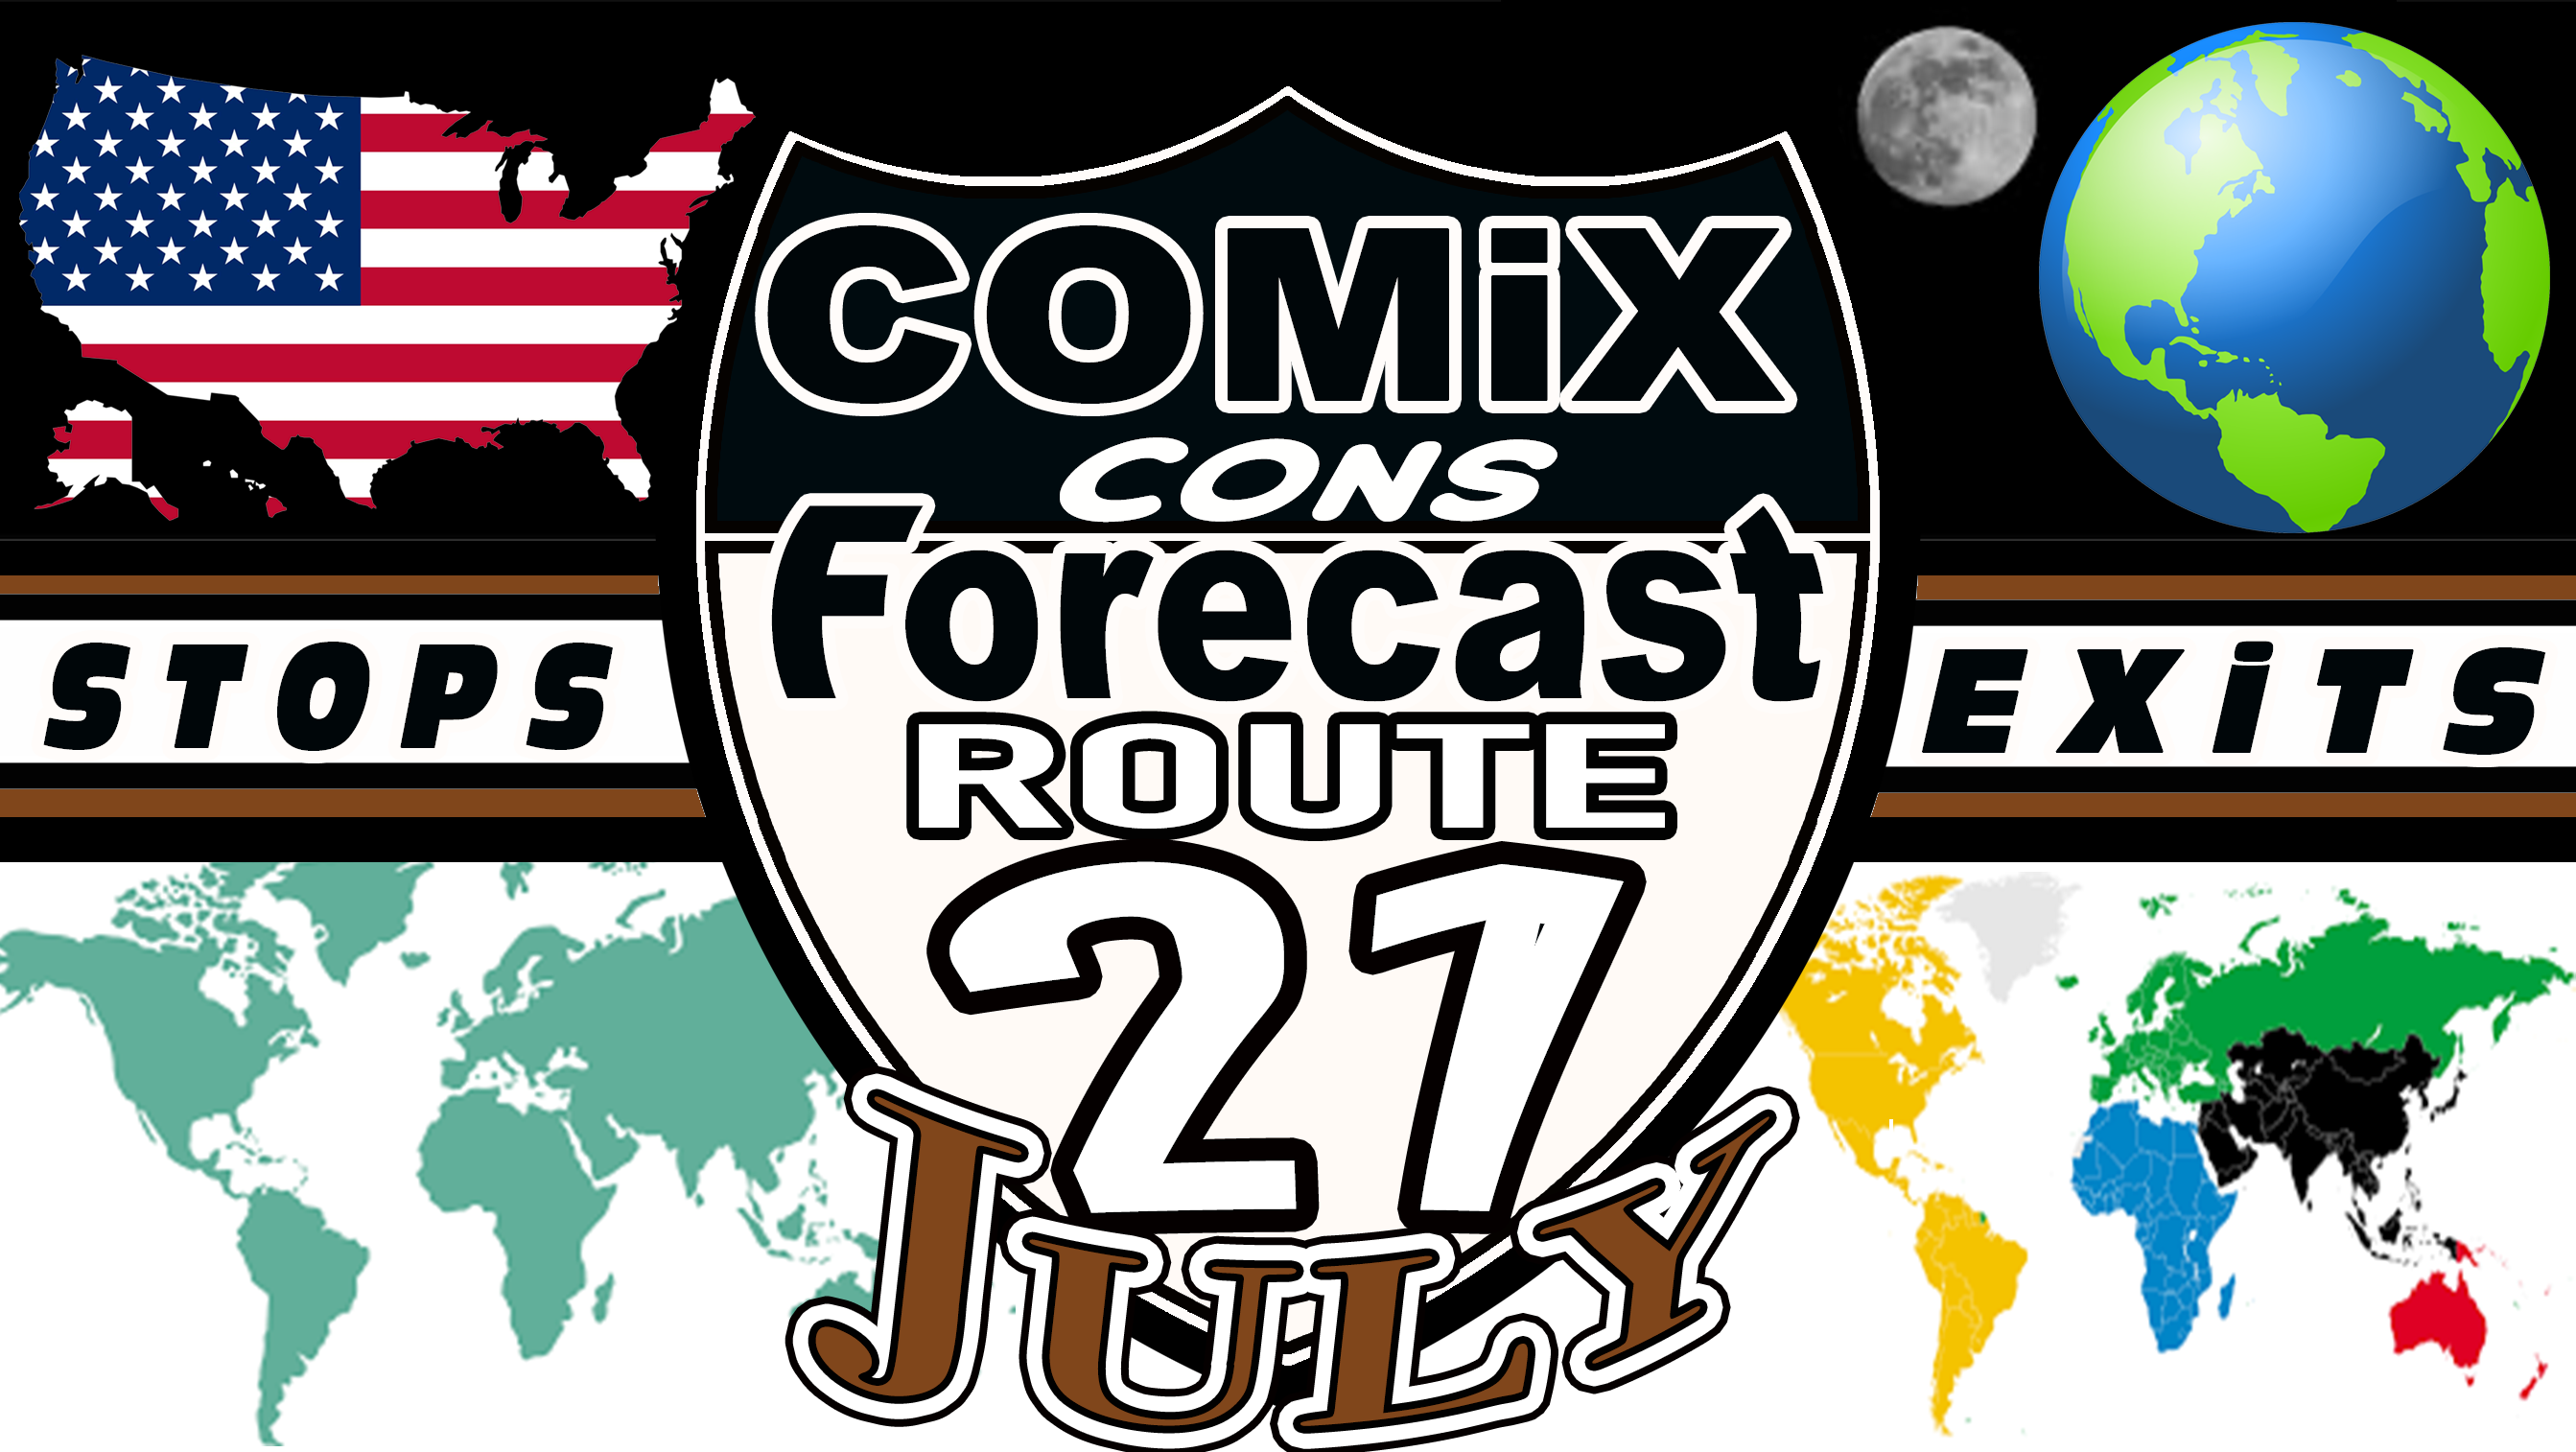 The COMiXcon ForeCast – for July 2021